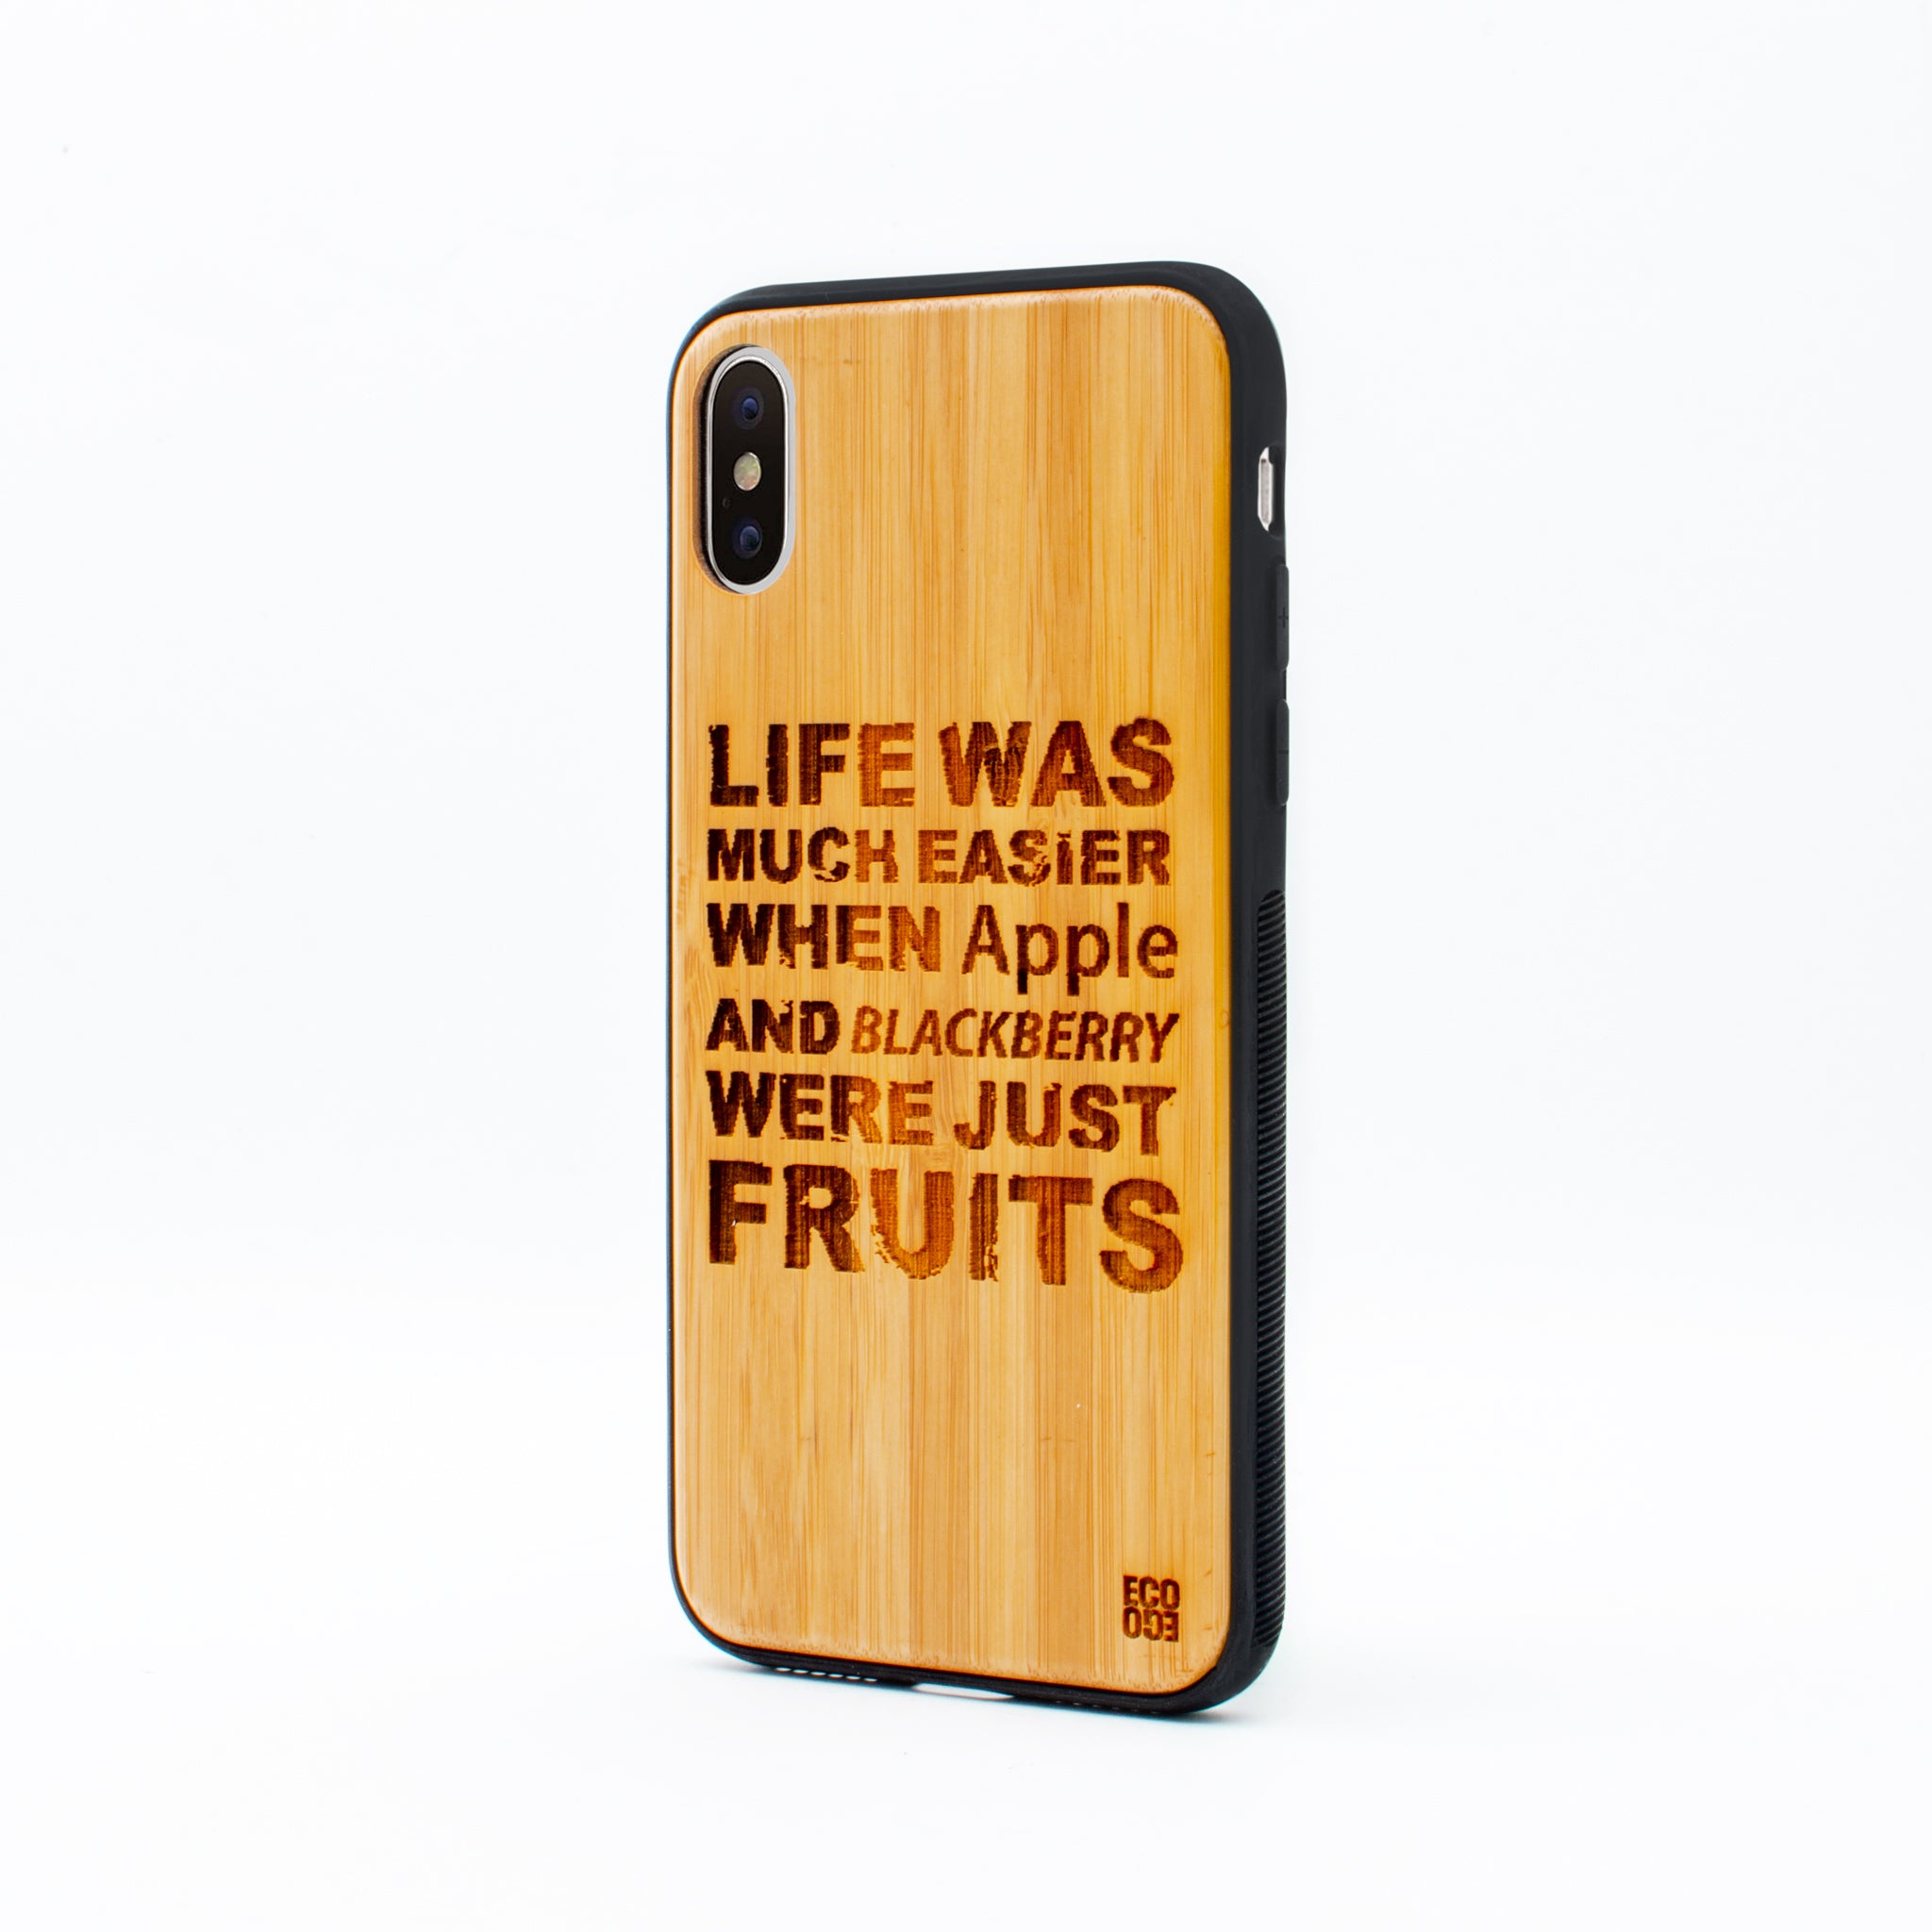 bamboo iphone x case life was ecoego